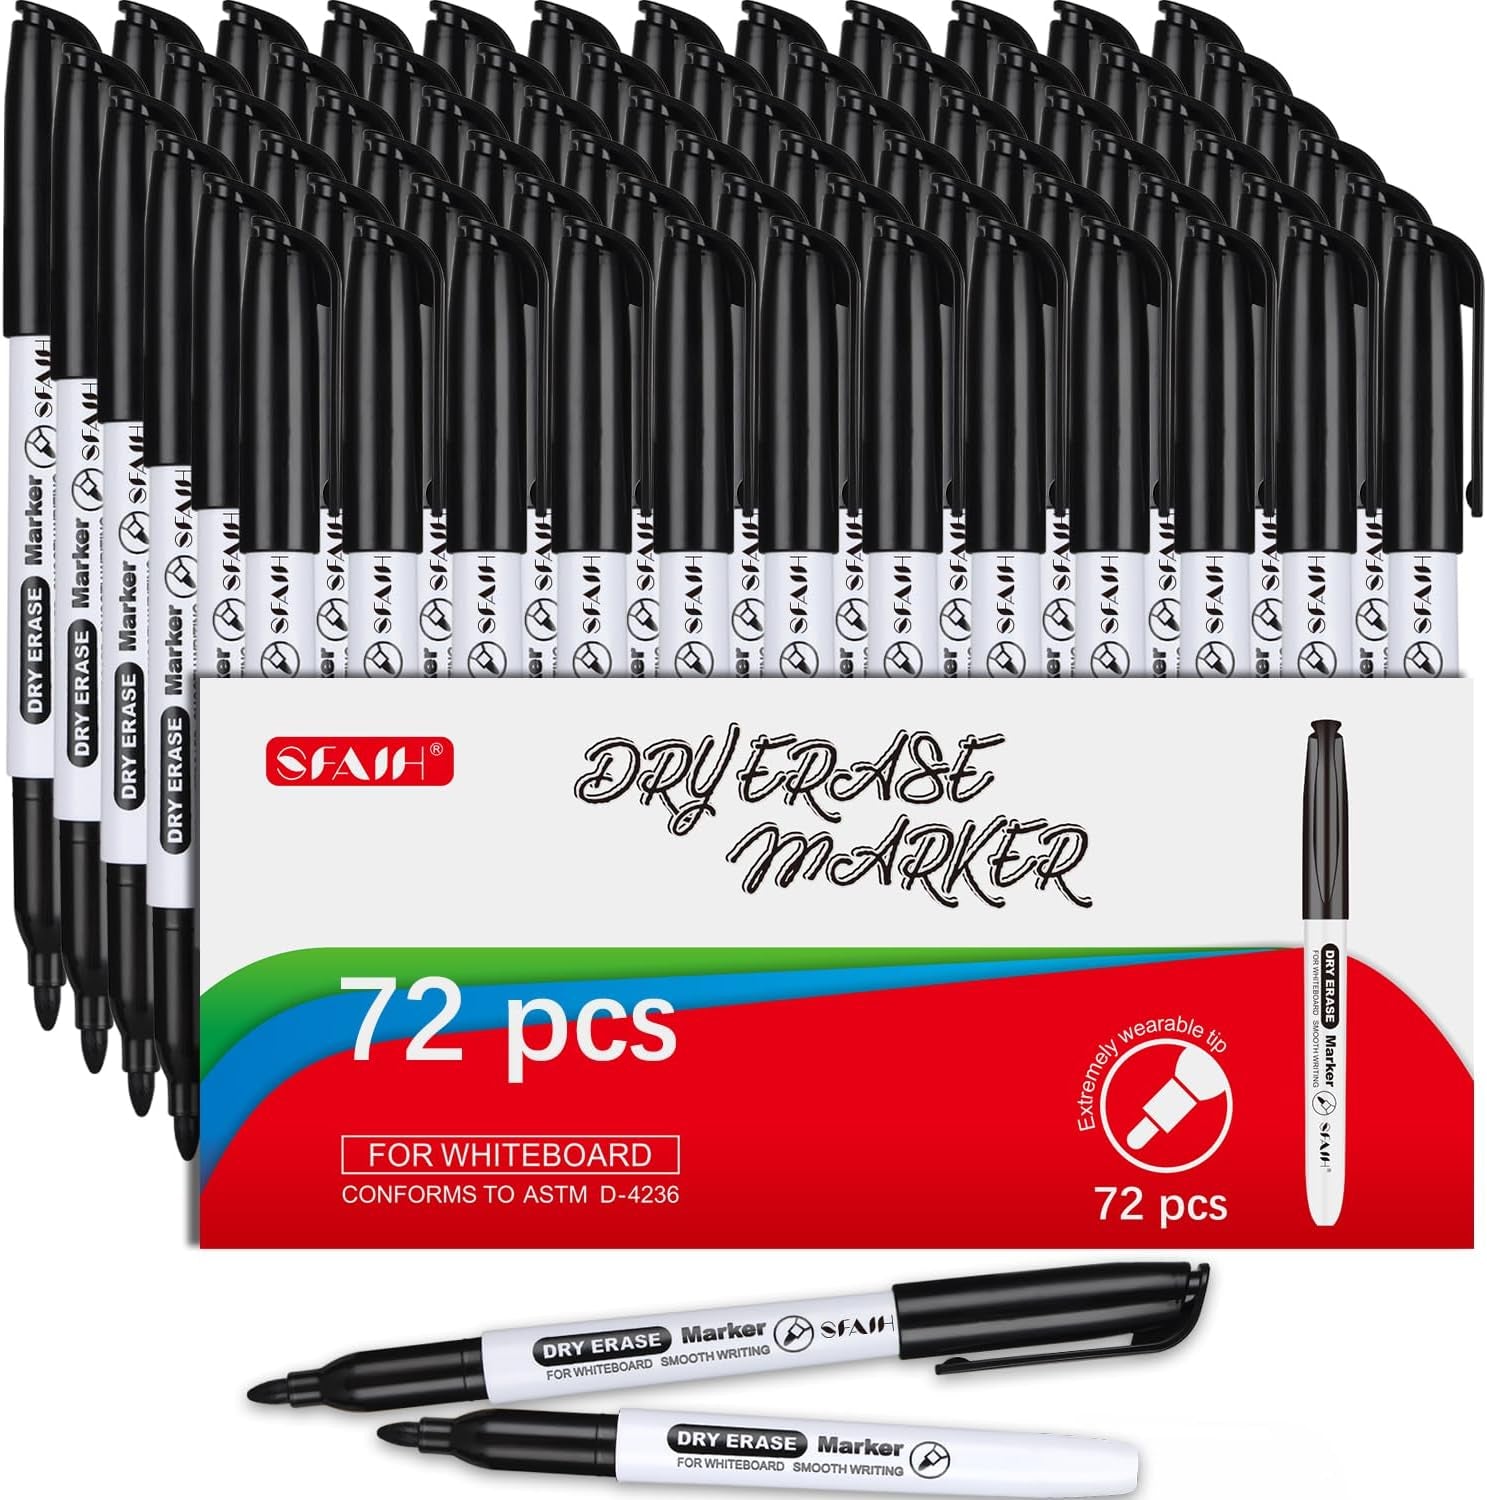 Fine Tip Dry Erase Markers - 24 Pack Black Whiteboard Erasable Markers Bulk for Kids Adults, Ideal for Classroom School Office Home Use on White Board, Non-Toxic Easy Clean